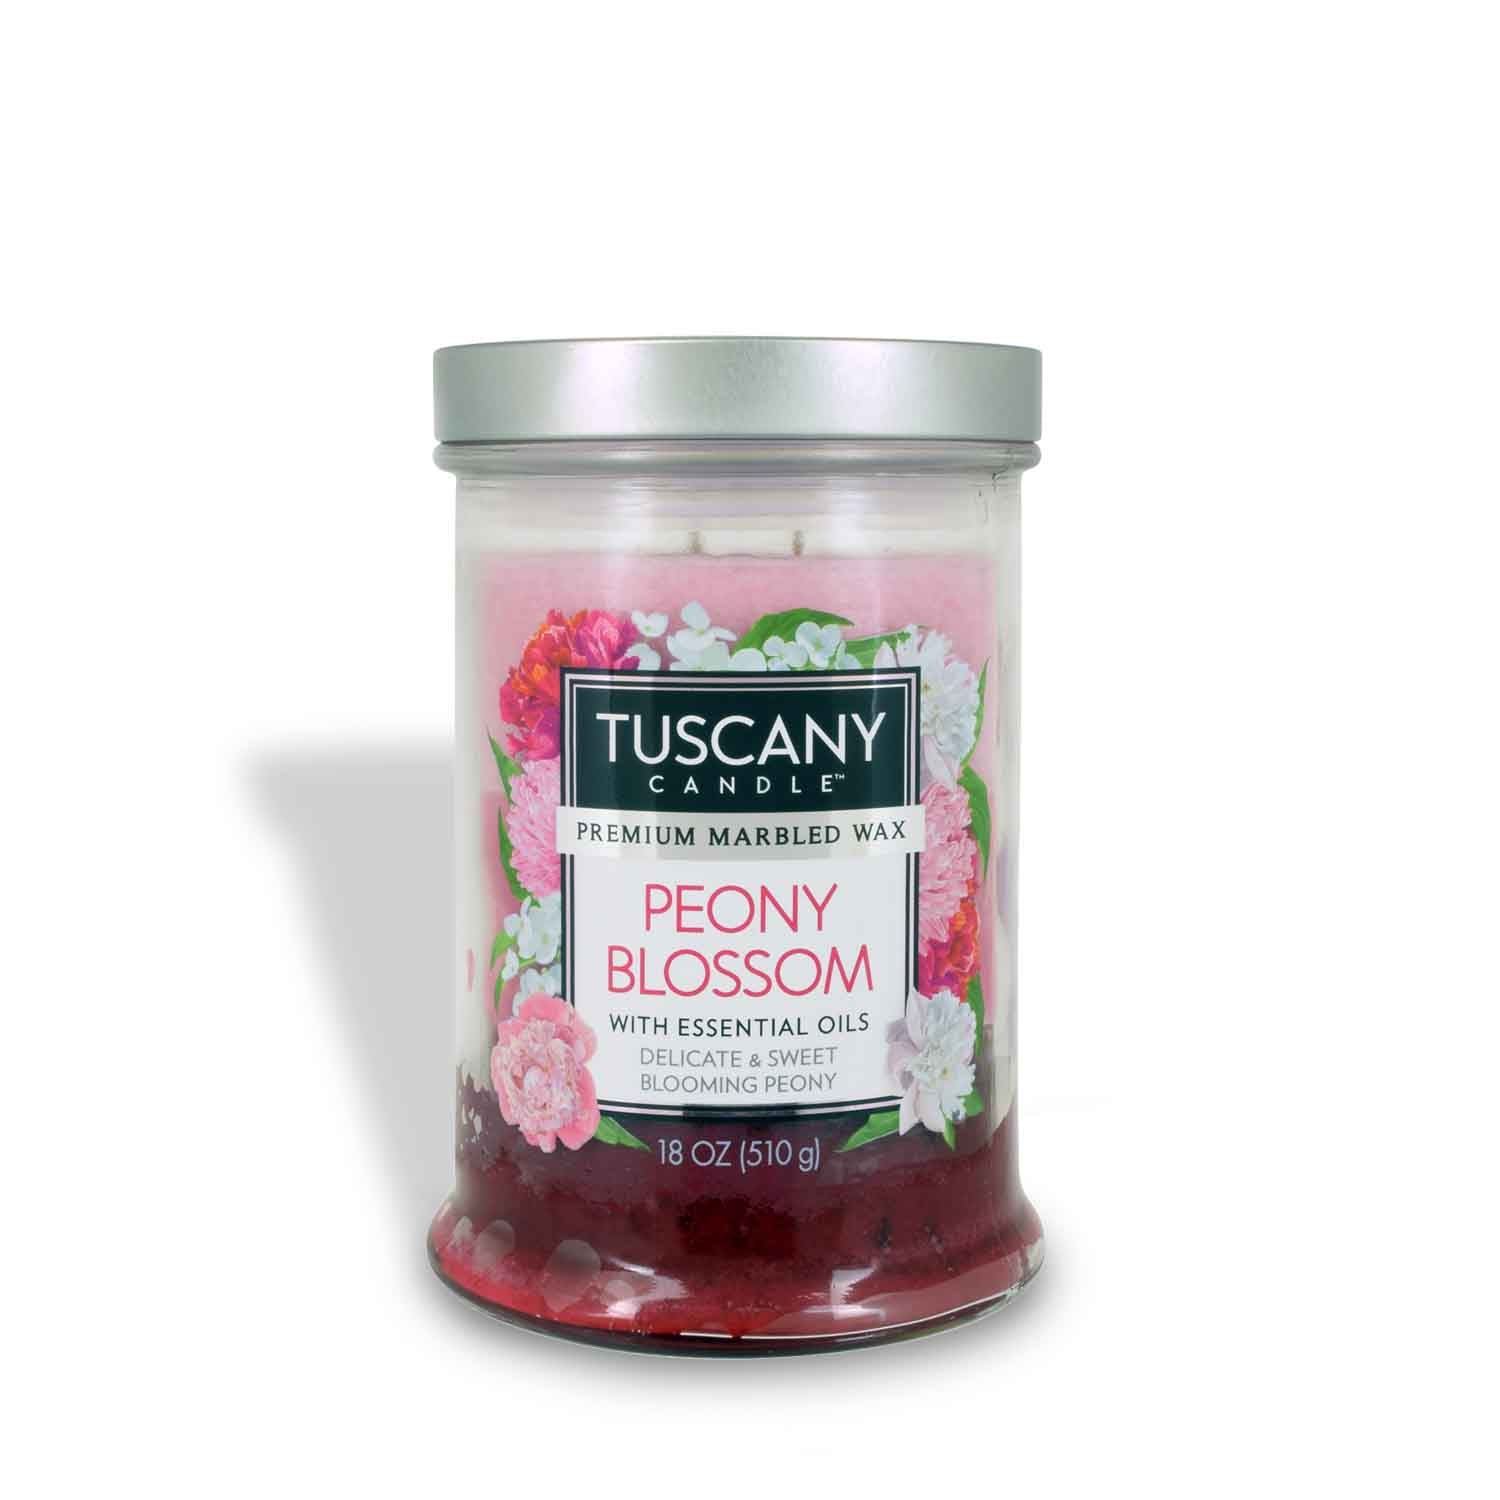 Tuscany Candle® EVD Peony Blossom Long-Lasting Scented Jar Candle (18 oz) with fragrance notes.